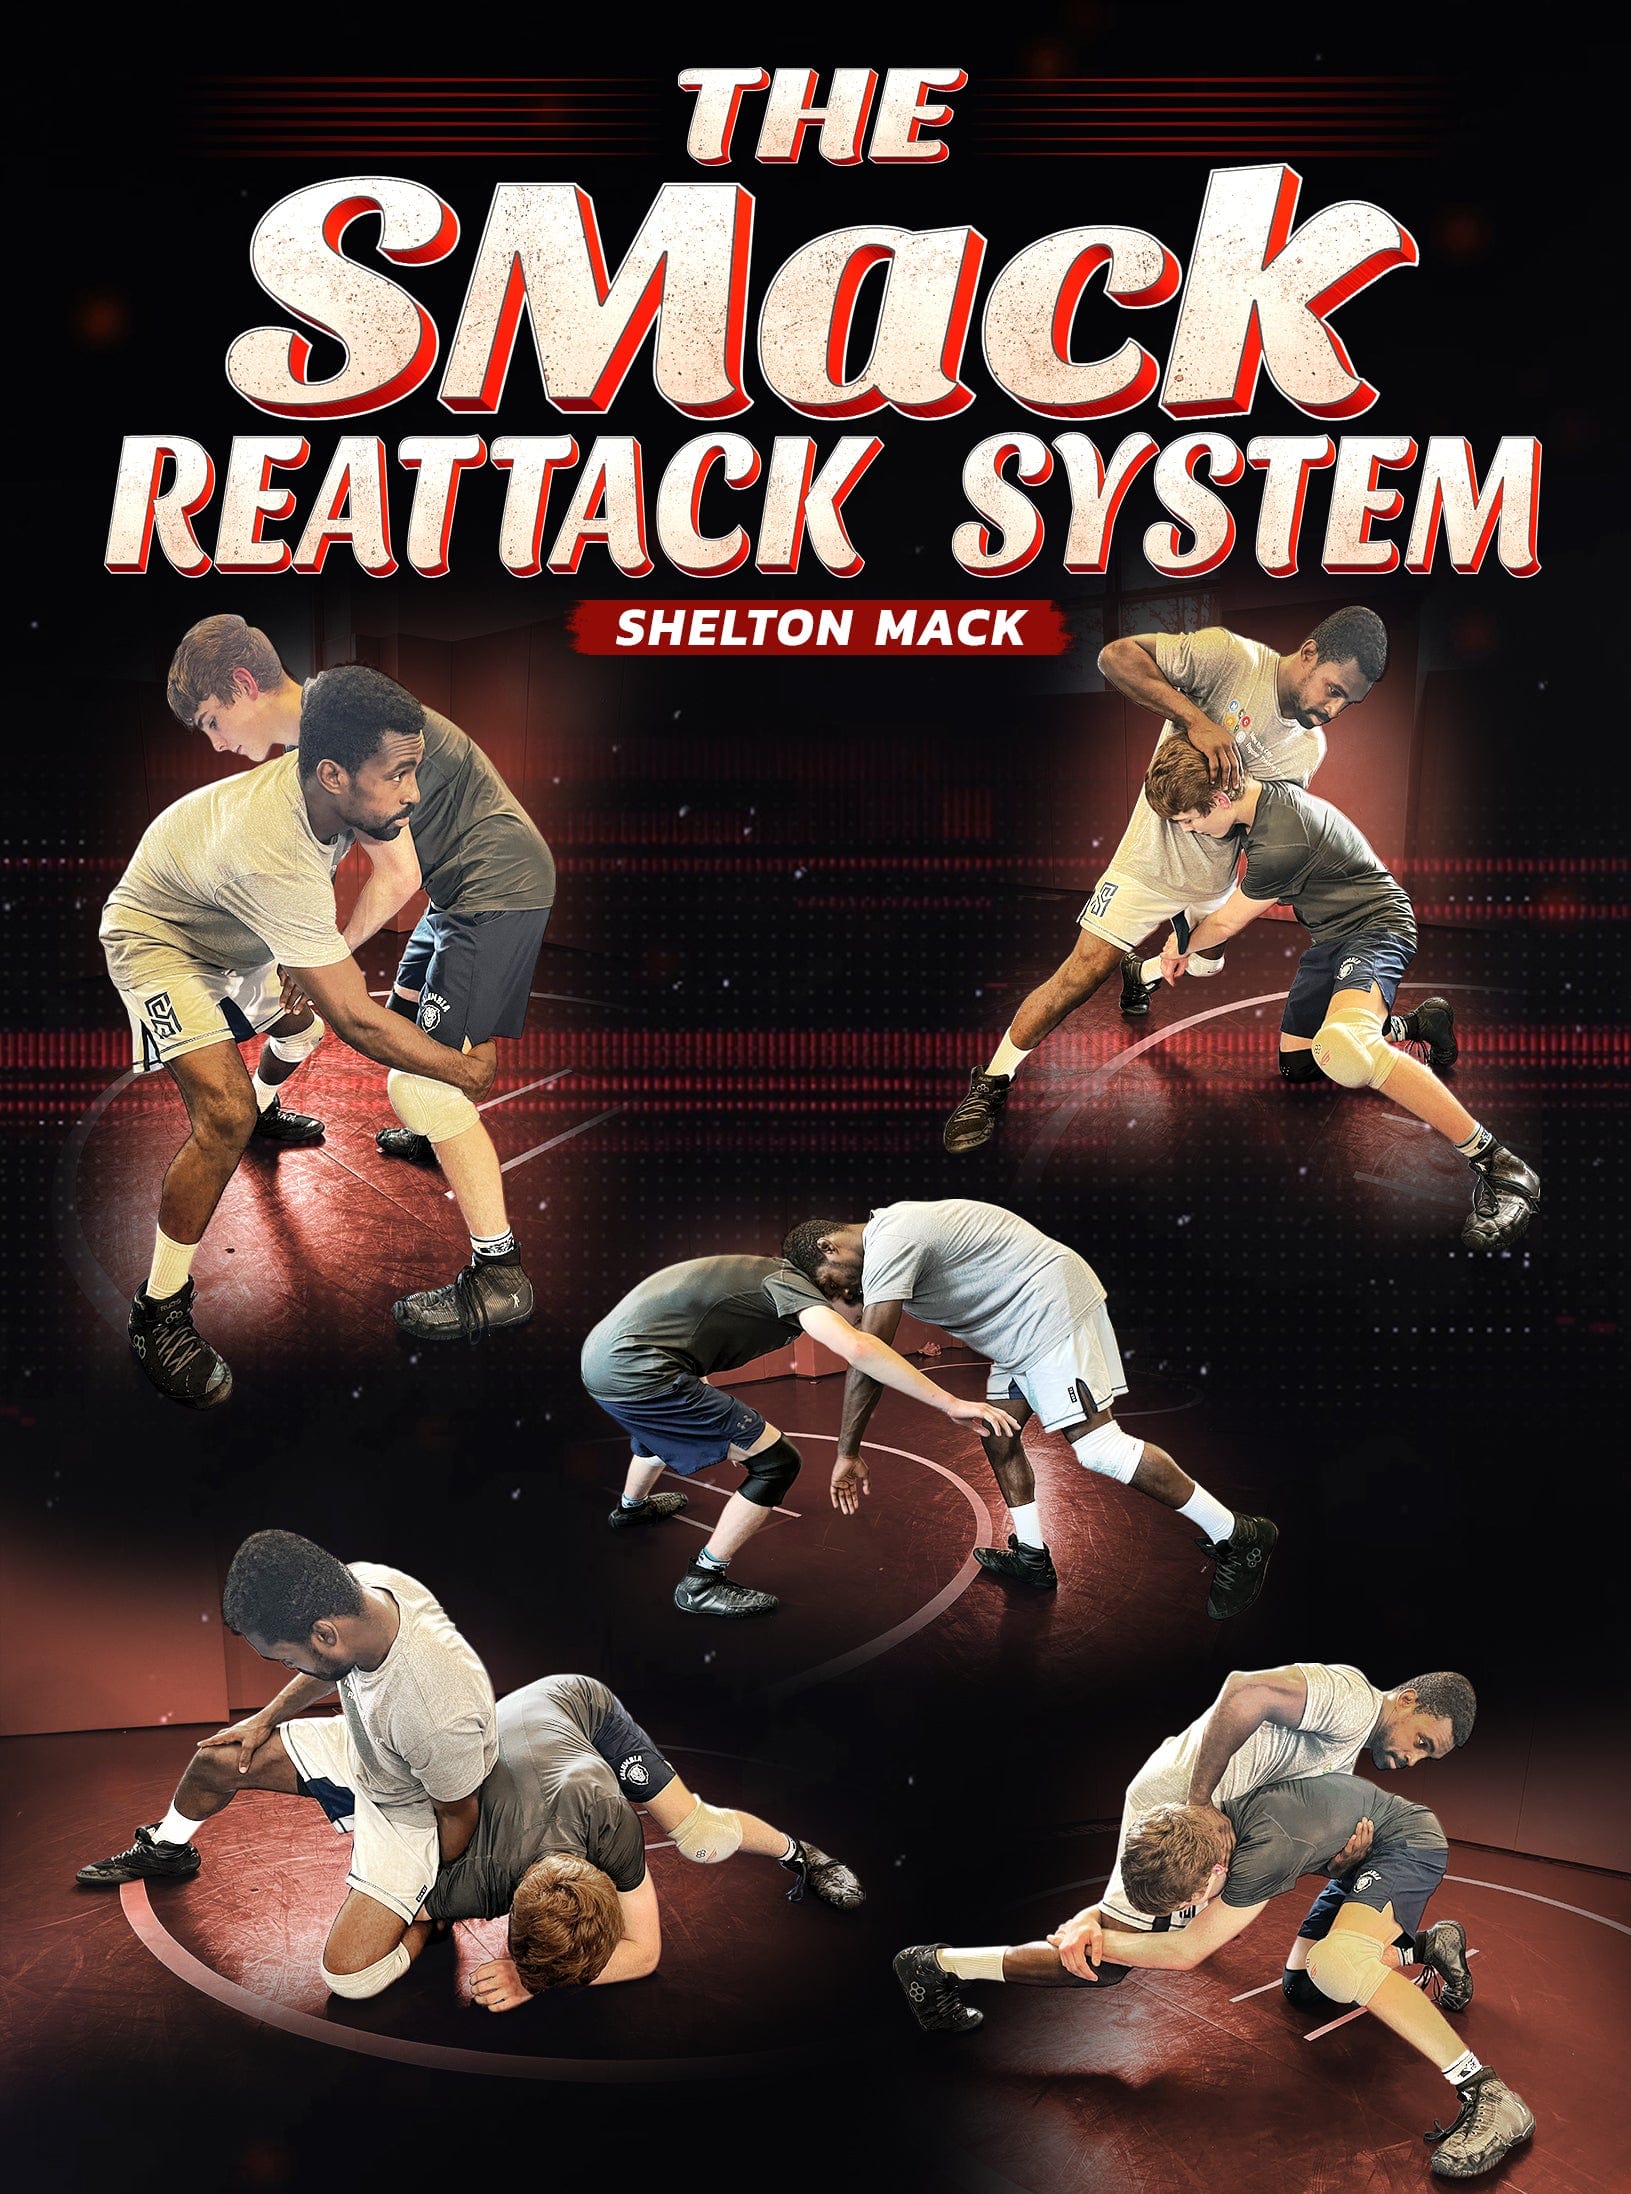 The SMack Reattack System by Shelton Mack - Fanatic Wrestling